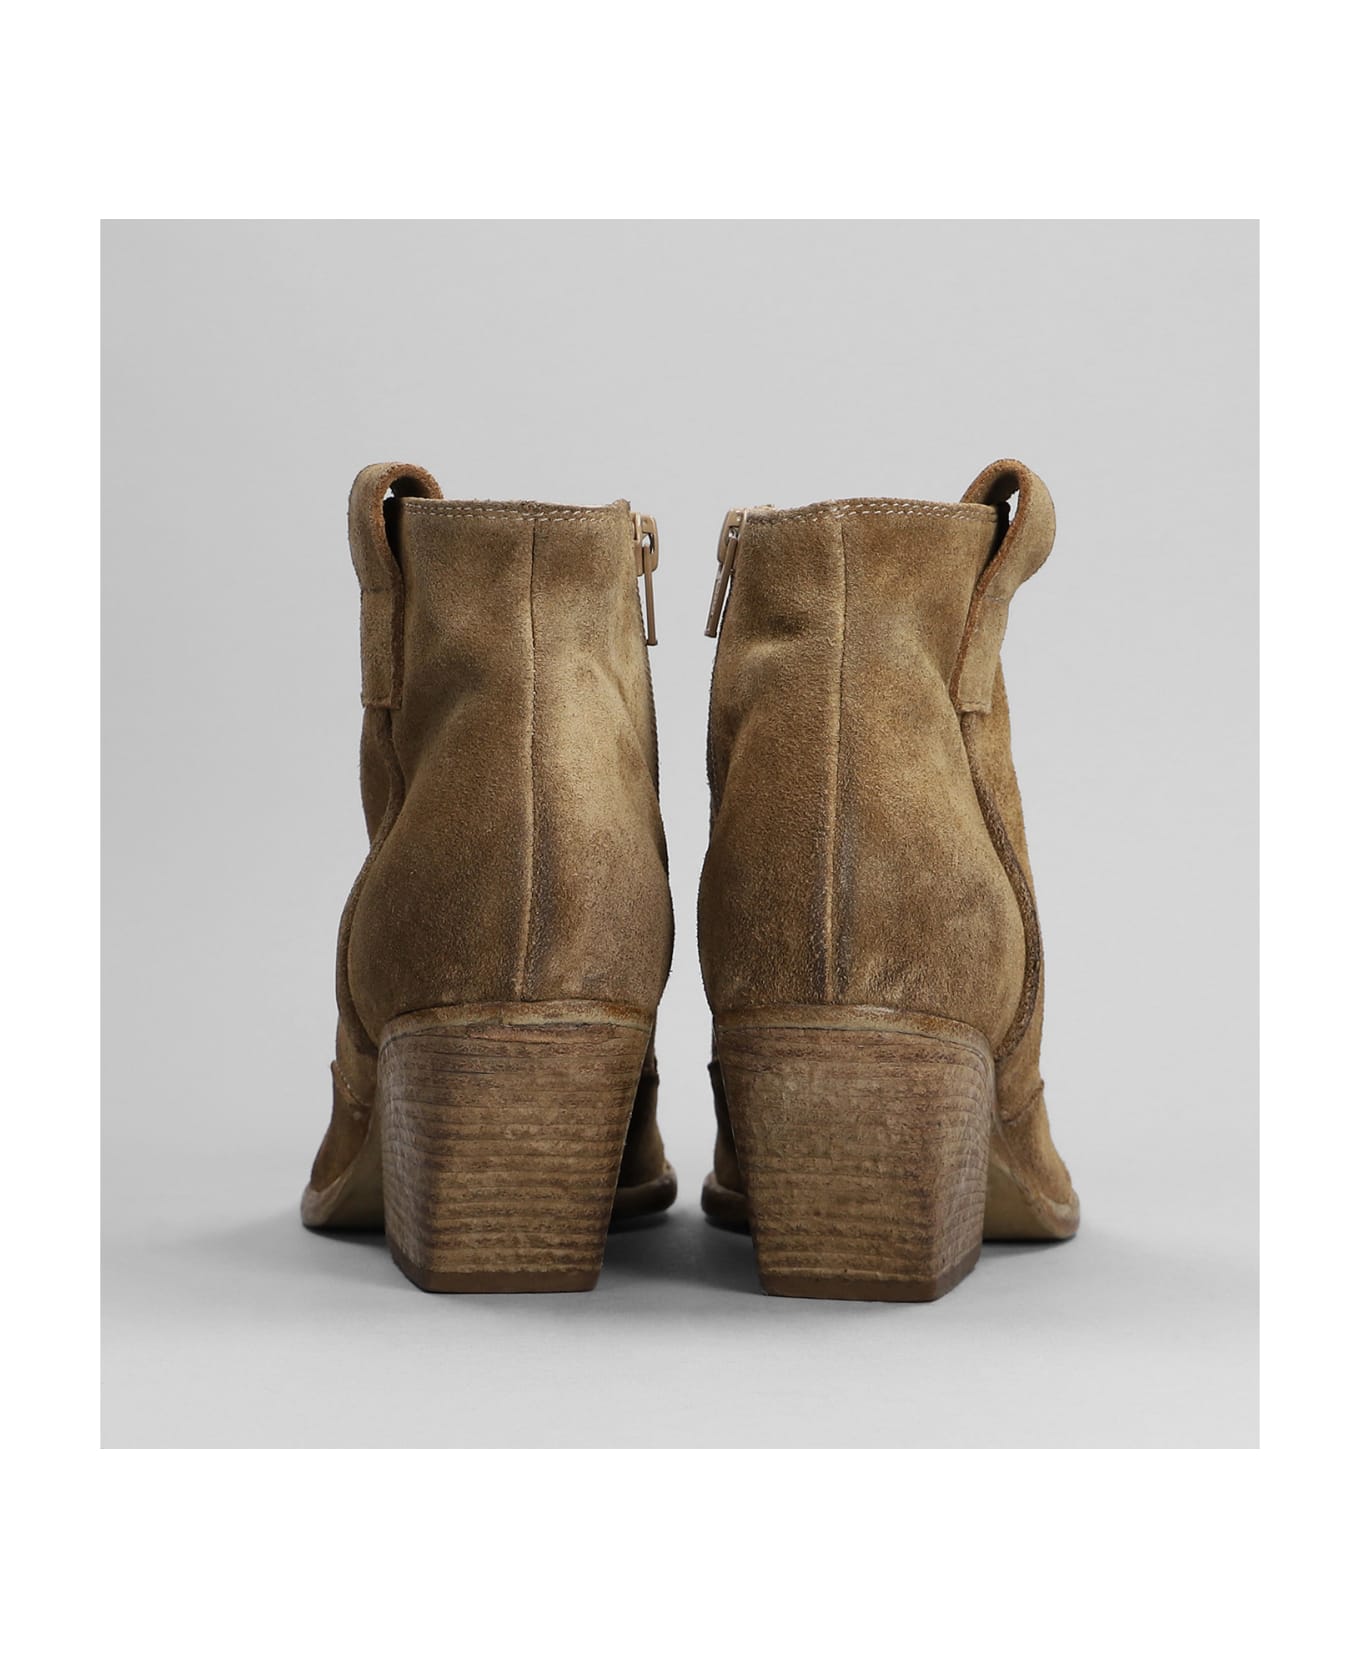 Elena Iachi Texan Ankle Boots In Camel Suede - Camel